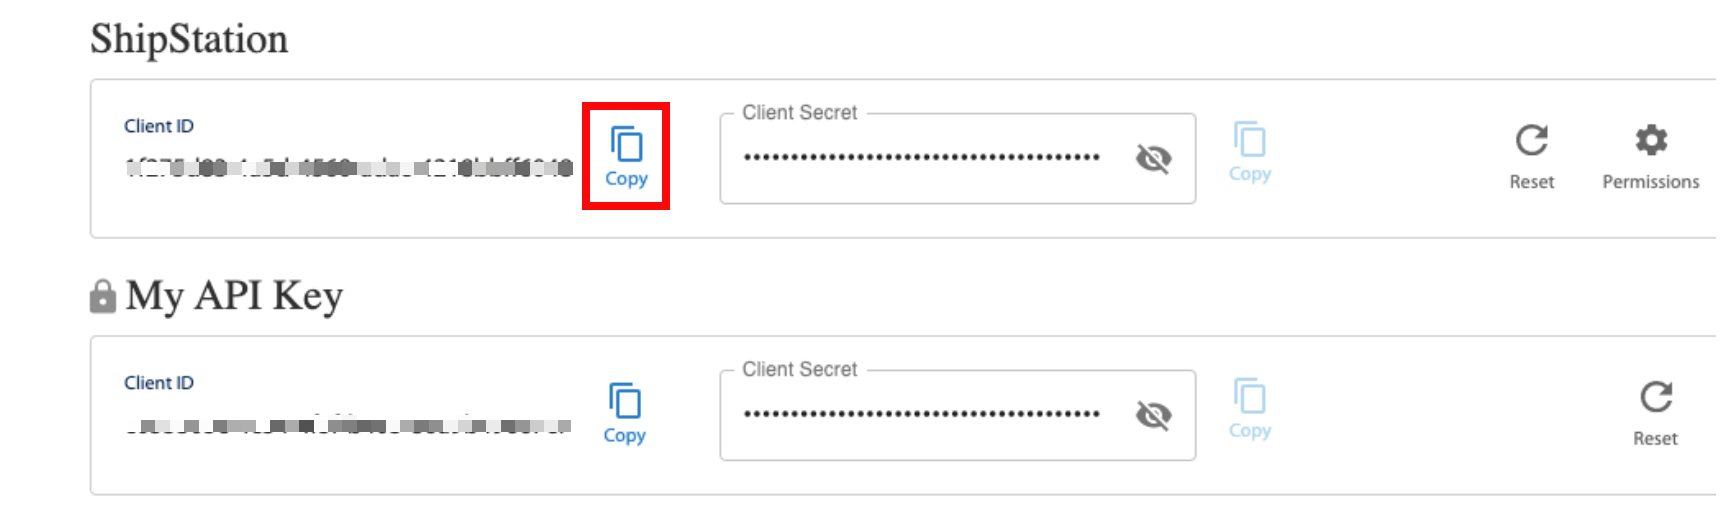 The ShipStation Client ID copy icon is marked.